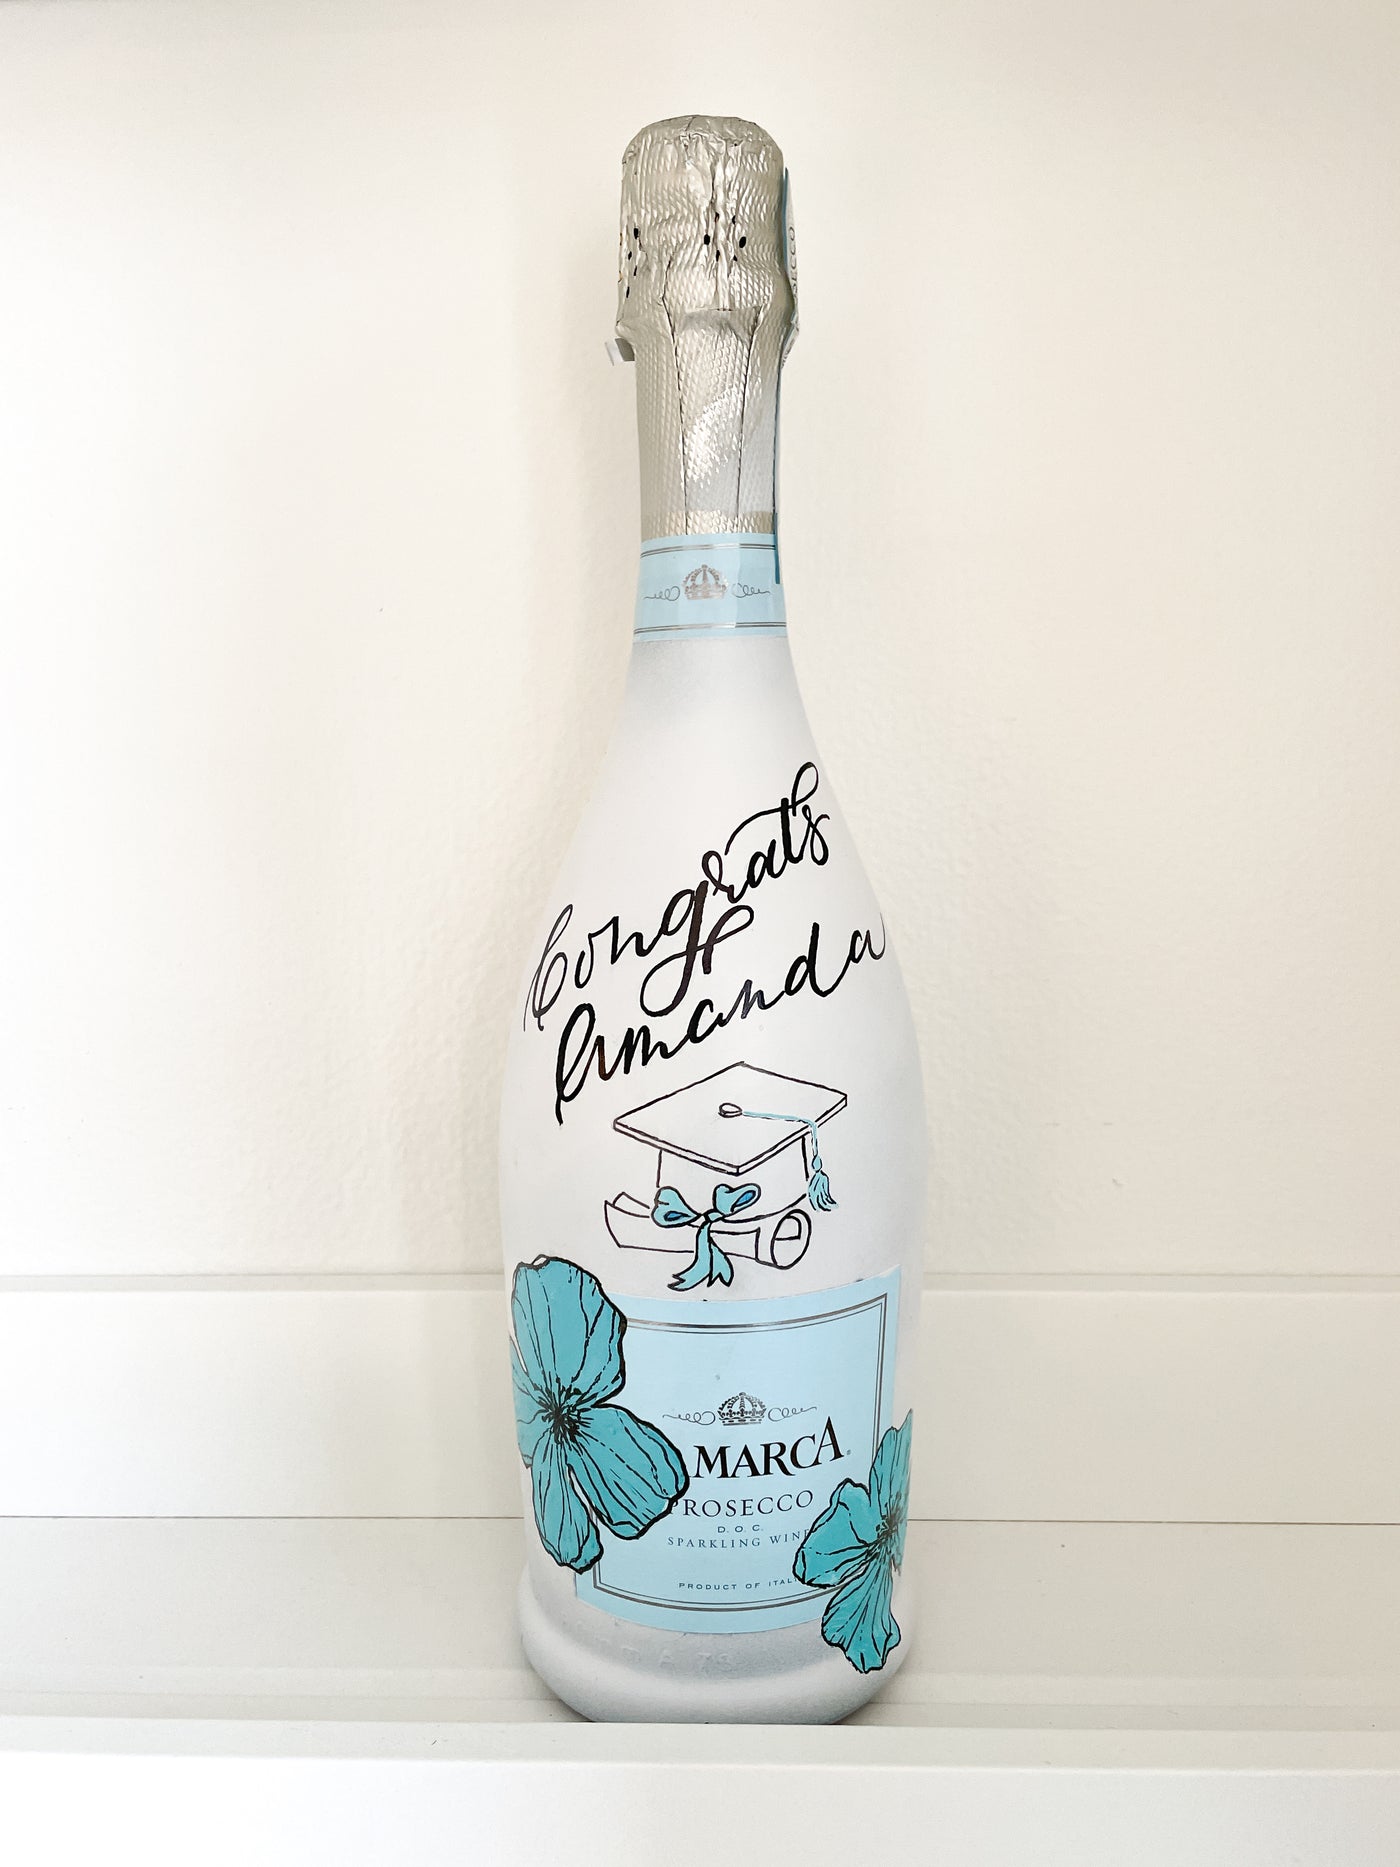 Personalized Bottle Engraving or Painting